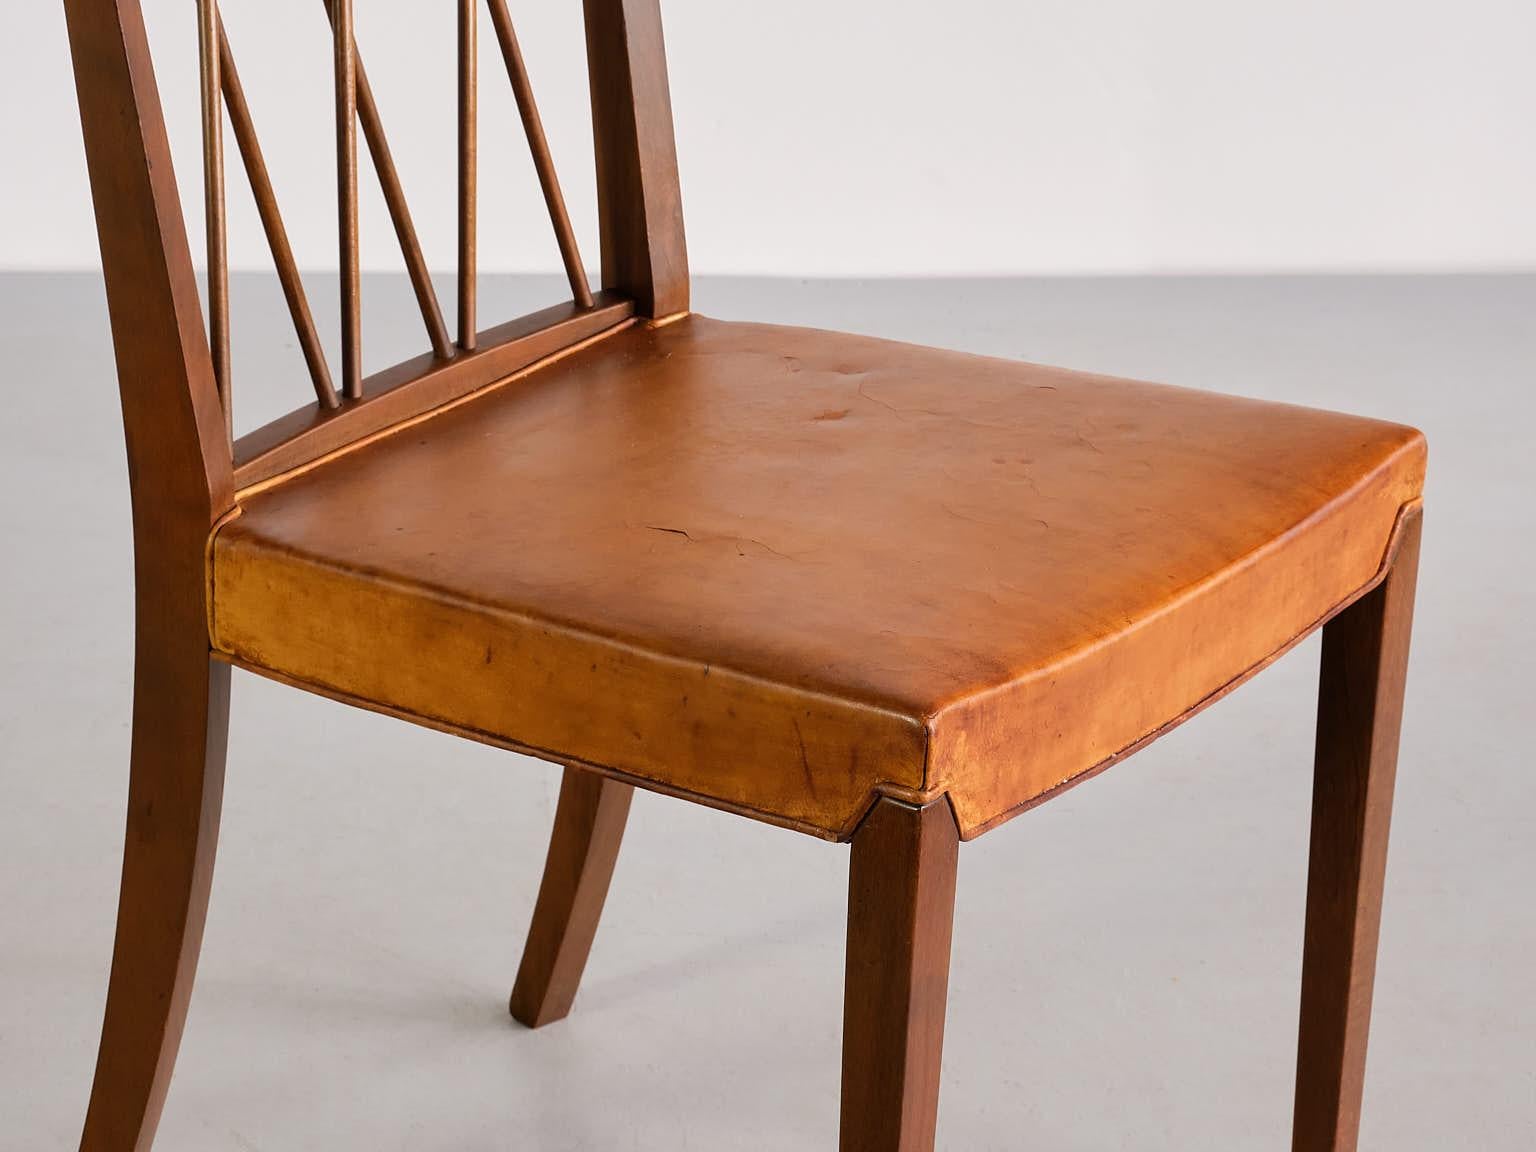 Set of Eight Frode Holm Dining Chairs, Walnut and Leather, Illum, Denmark, 1940s For Sale 10